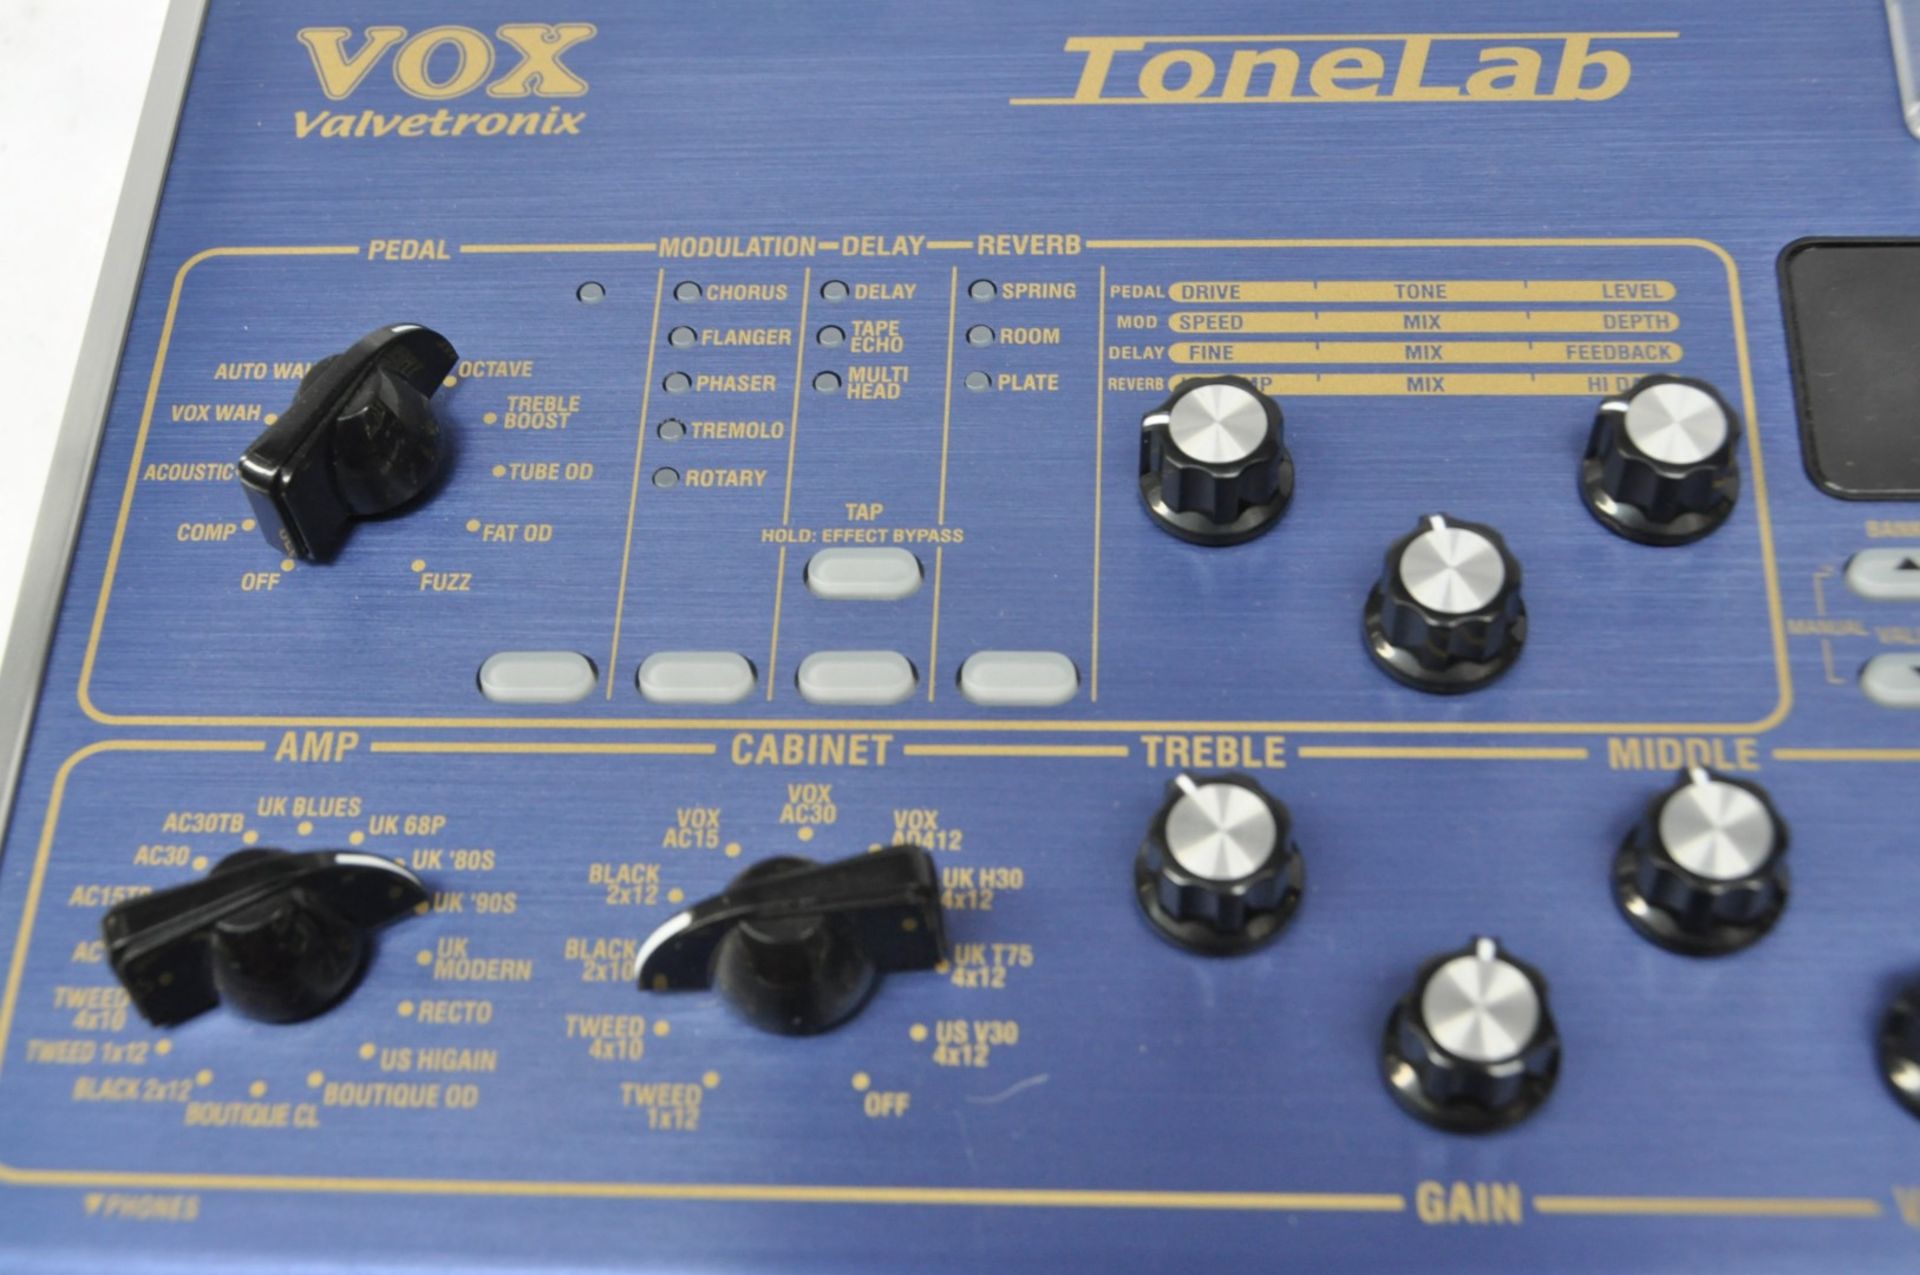 1 x Vox Valvetronix Tone Lab Guitar Amp Modelling Effects Unit – Ex Display Model – Boxed – Comes - Image 11 of 15